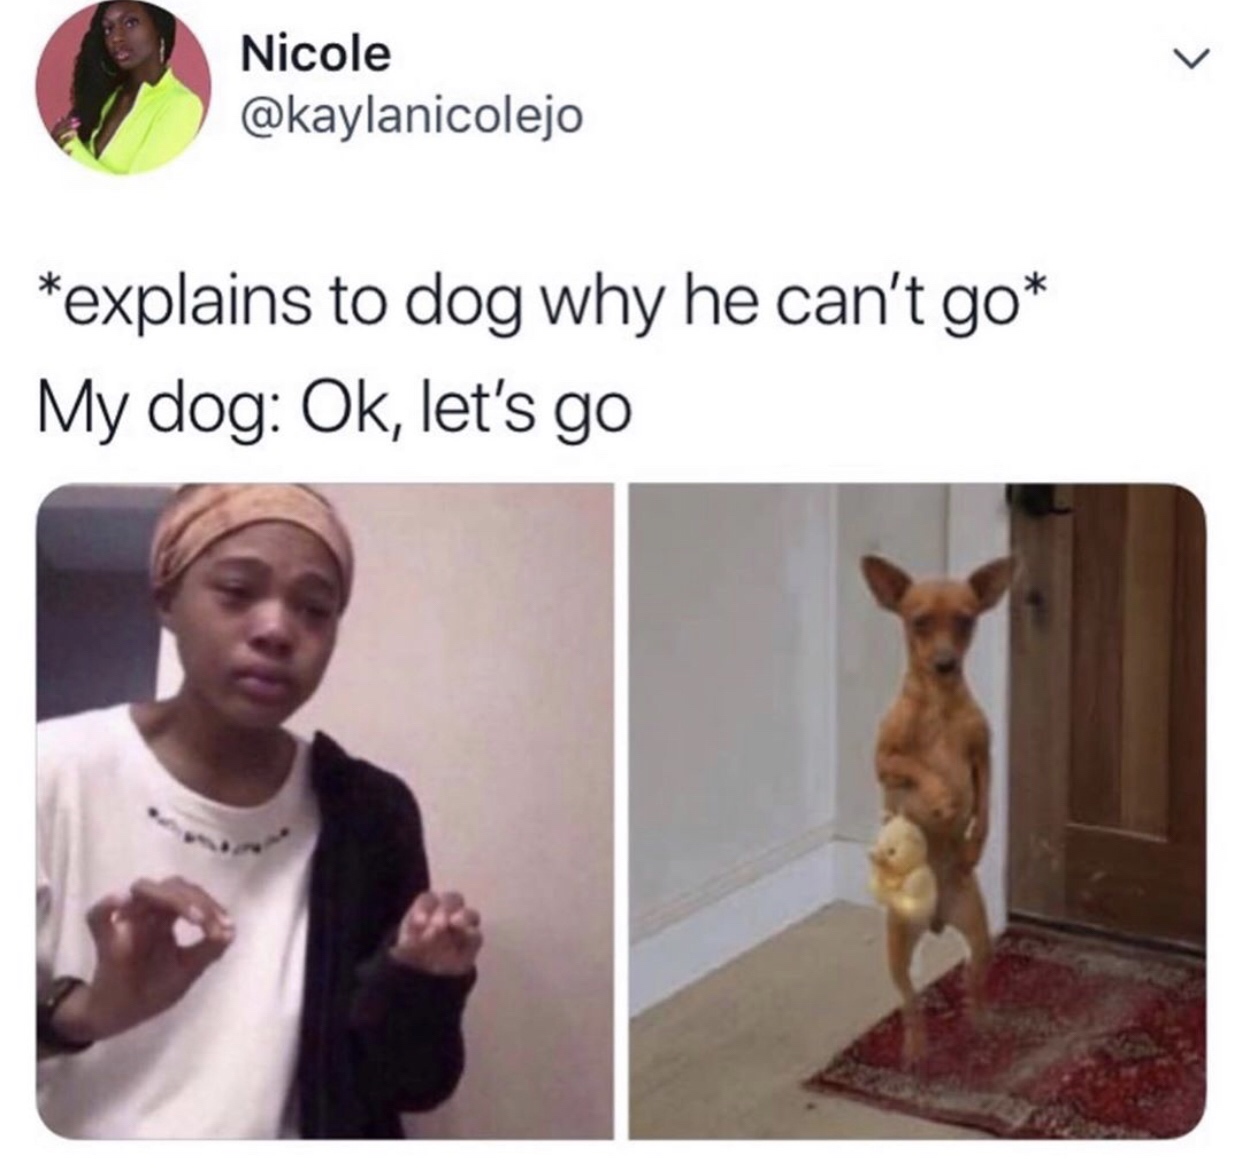 me explaining a song i heard years ago knowing only the melody - Nicole explains to dog why he can't go My dog Ok, let's go